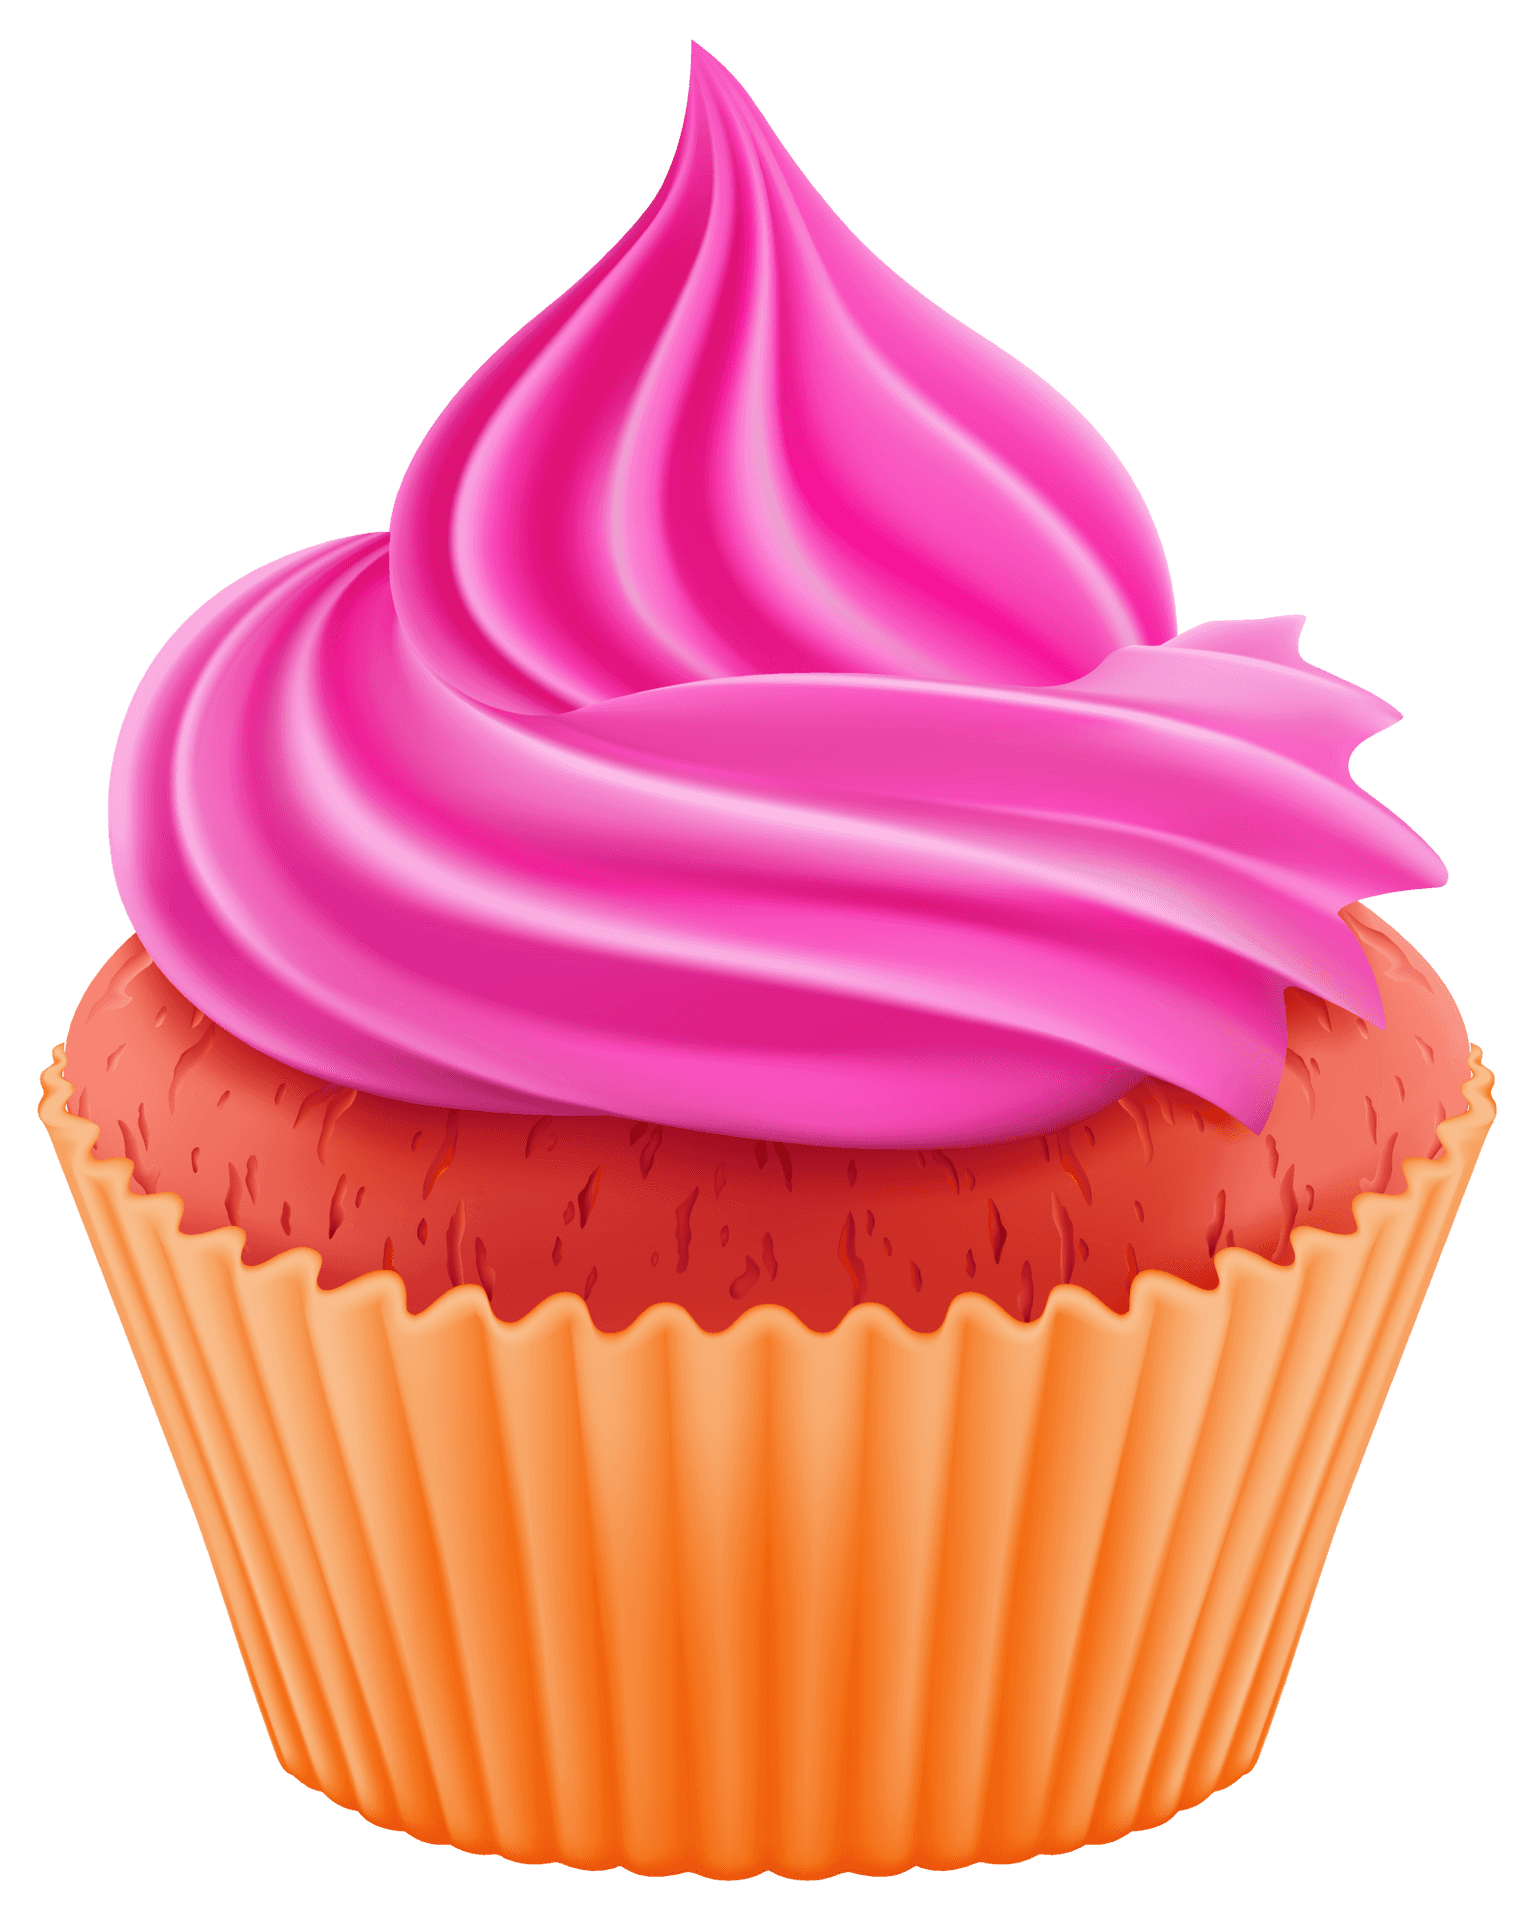 Pink Frosted Cupcake Illustration PNG